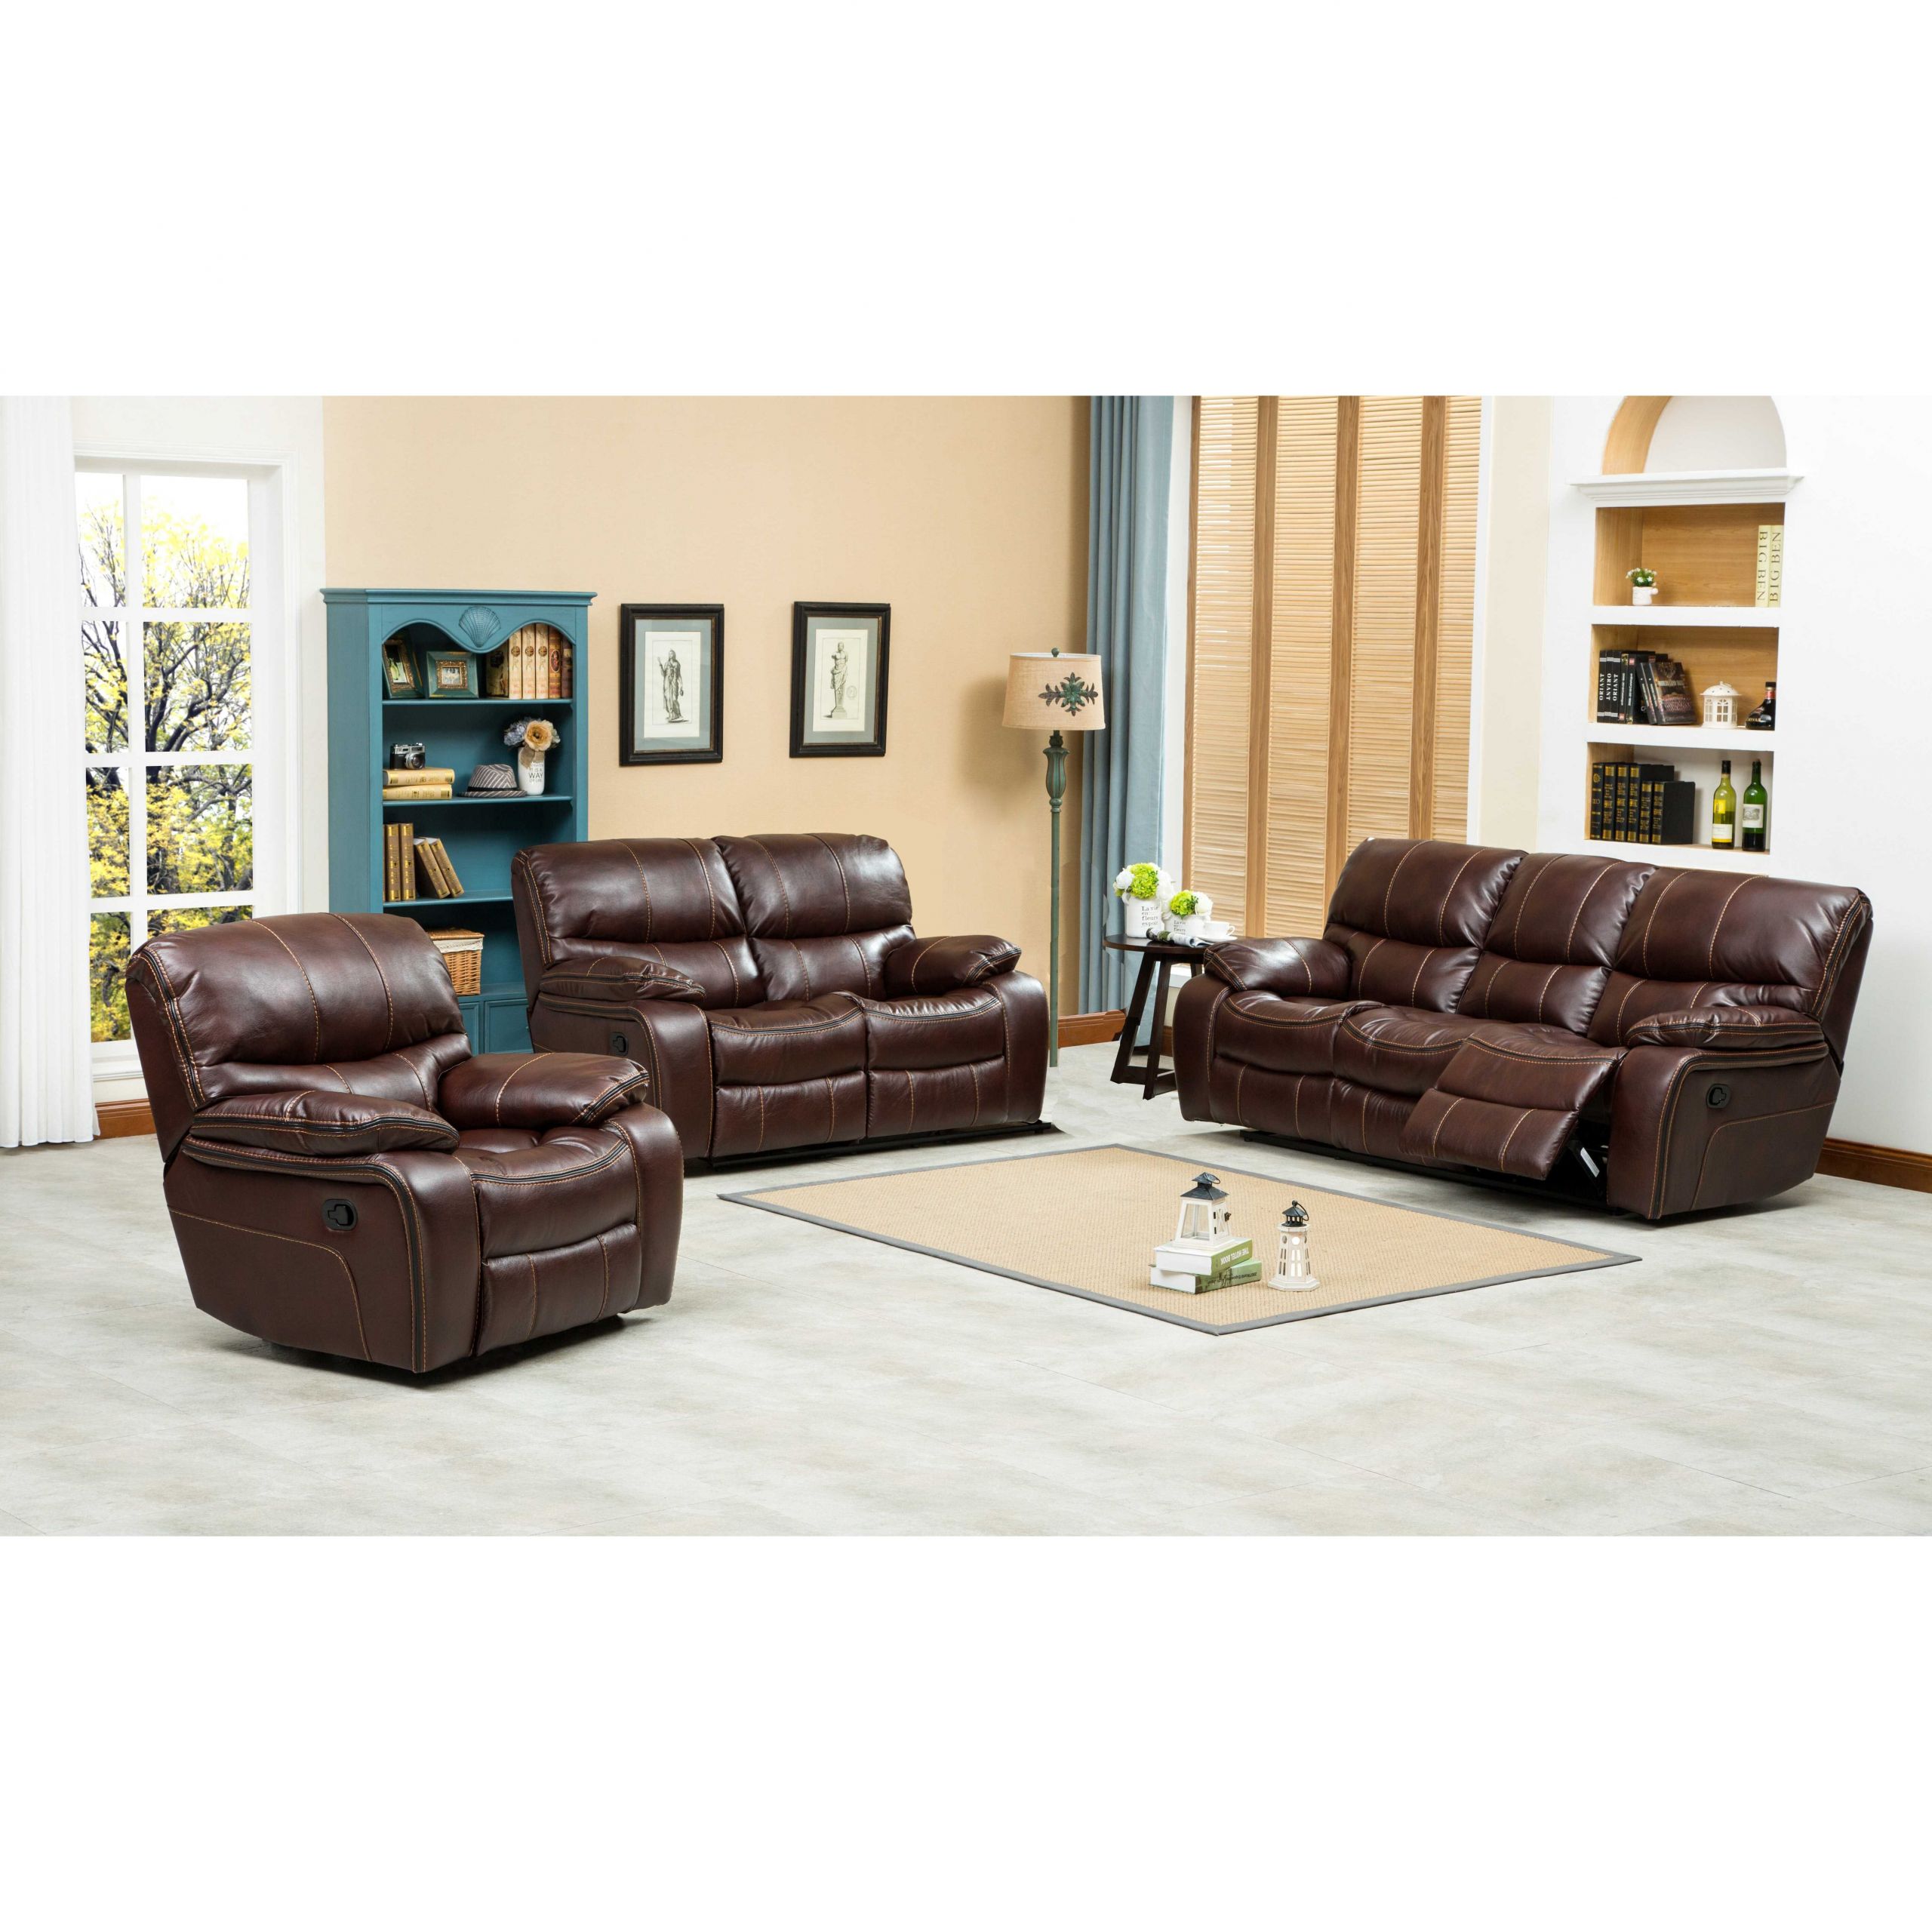 3 Piece Living Room Tables
 Roundhill Furniture Ewa 3 Piece Reclining Leather Living